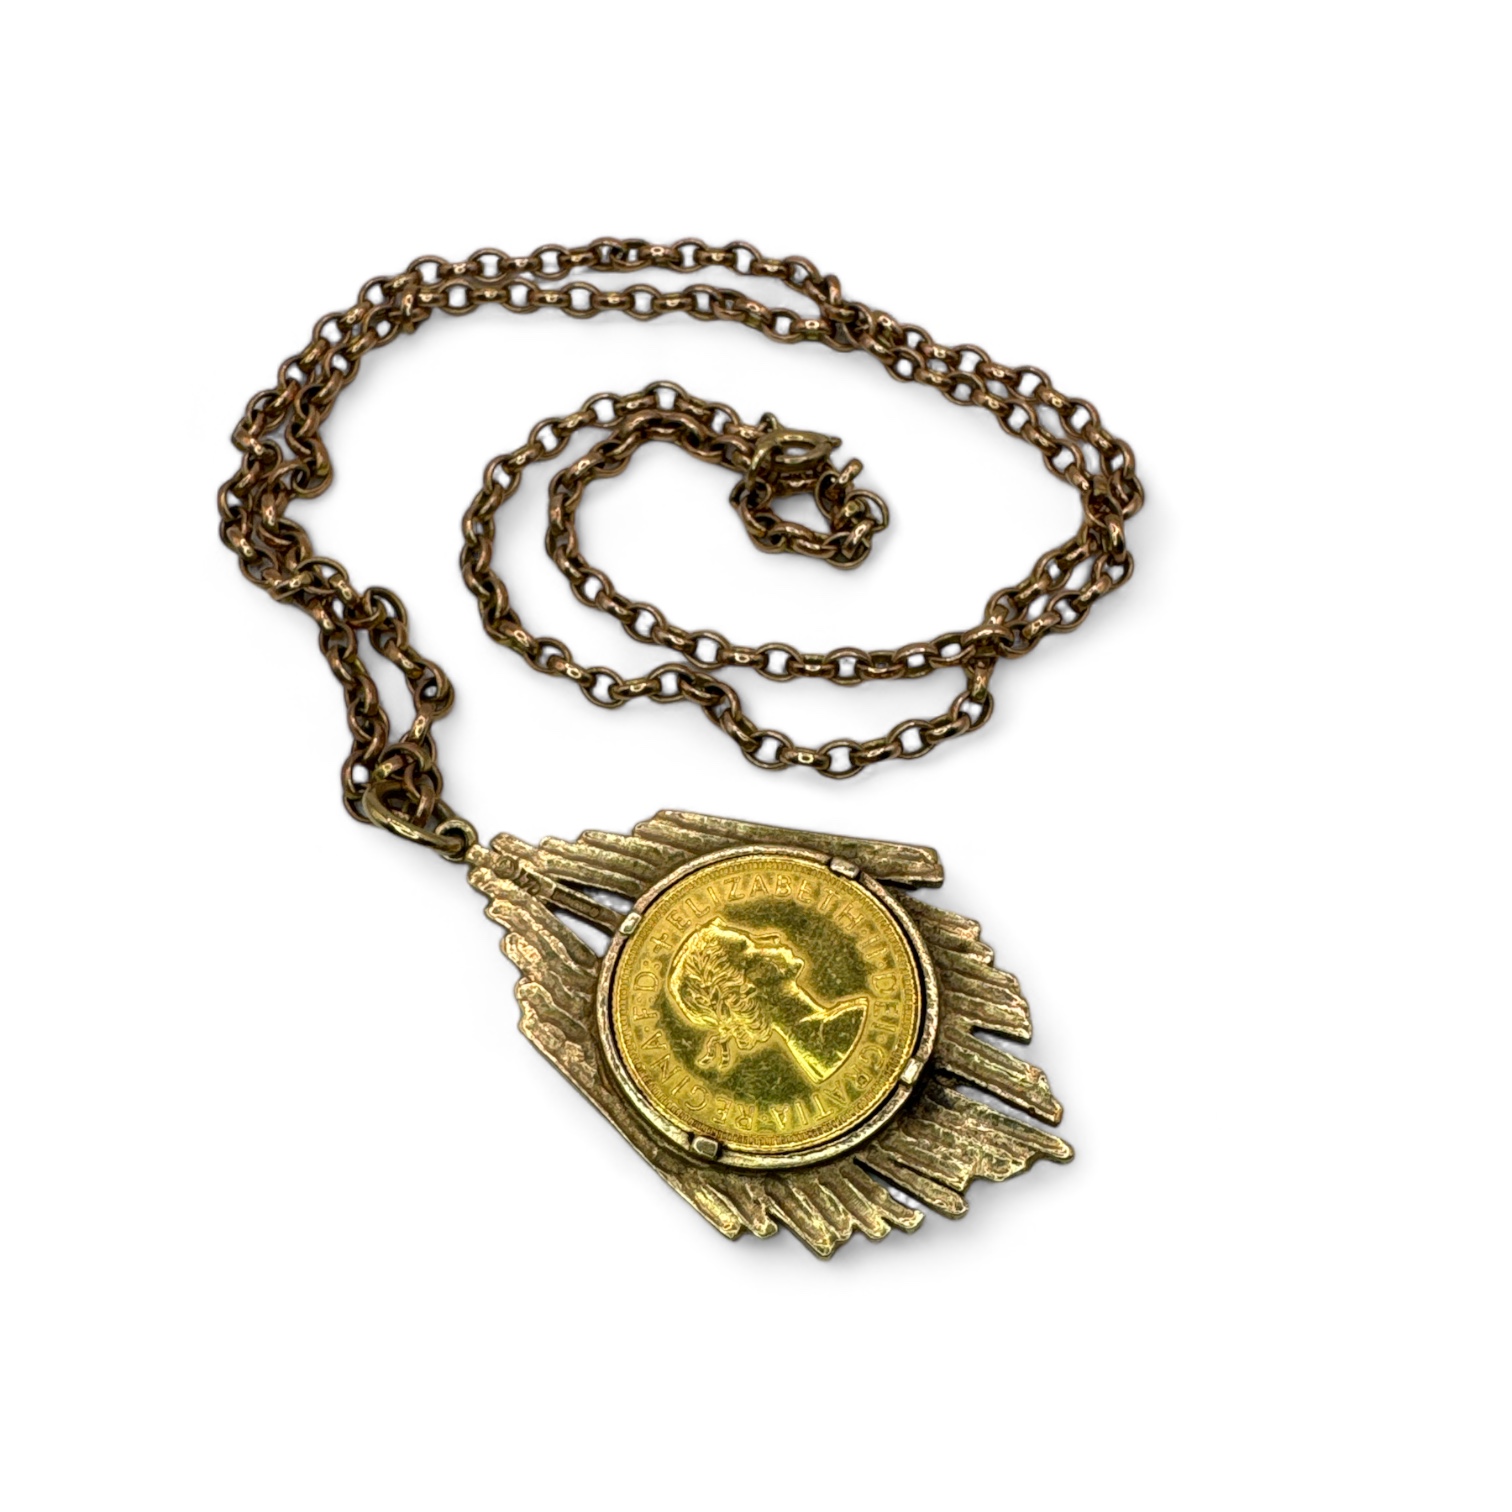 An Elizabeth II gold full Sovereign coin dated 1964 in a bark effect 9ct pendant mount on a gift